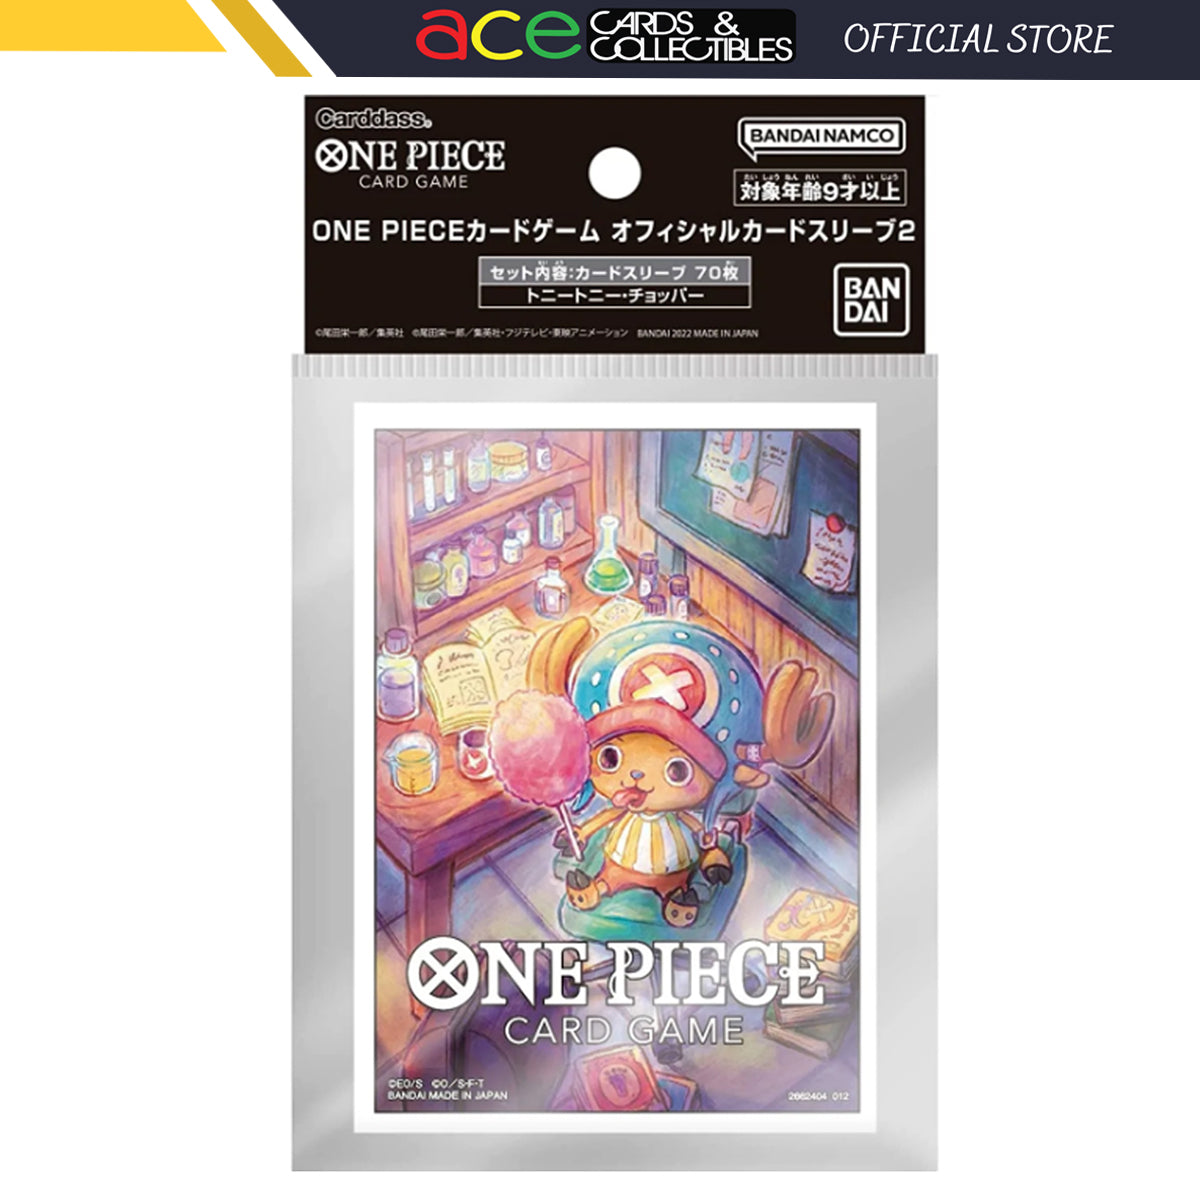 One Piece Card Game Official Deck Sleeves &quot;Tony Tony Chopper&quot; (Vol. 2)-Bandai Namco-Ace Cards &amp; Collectibles